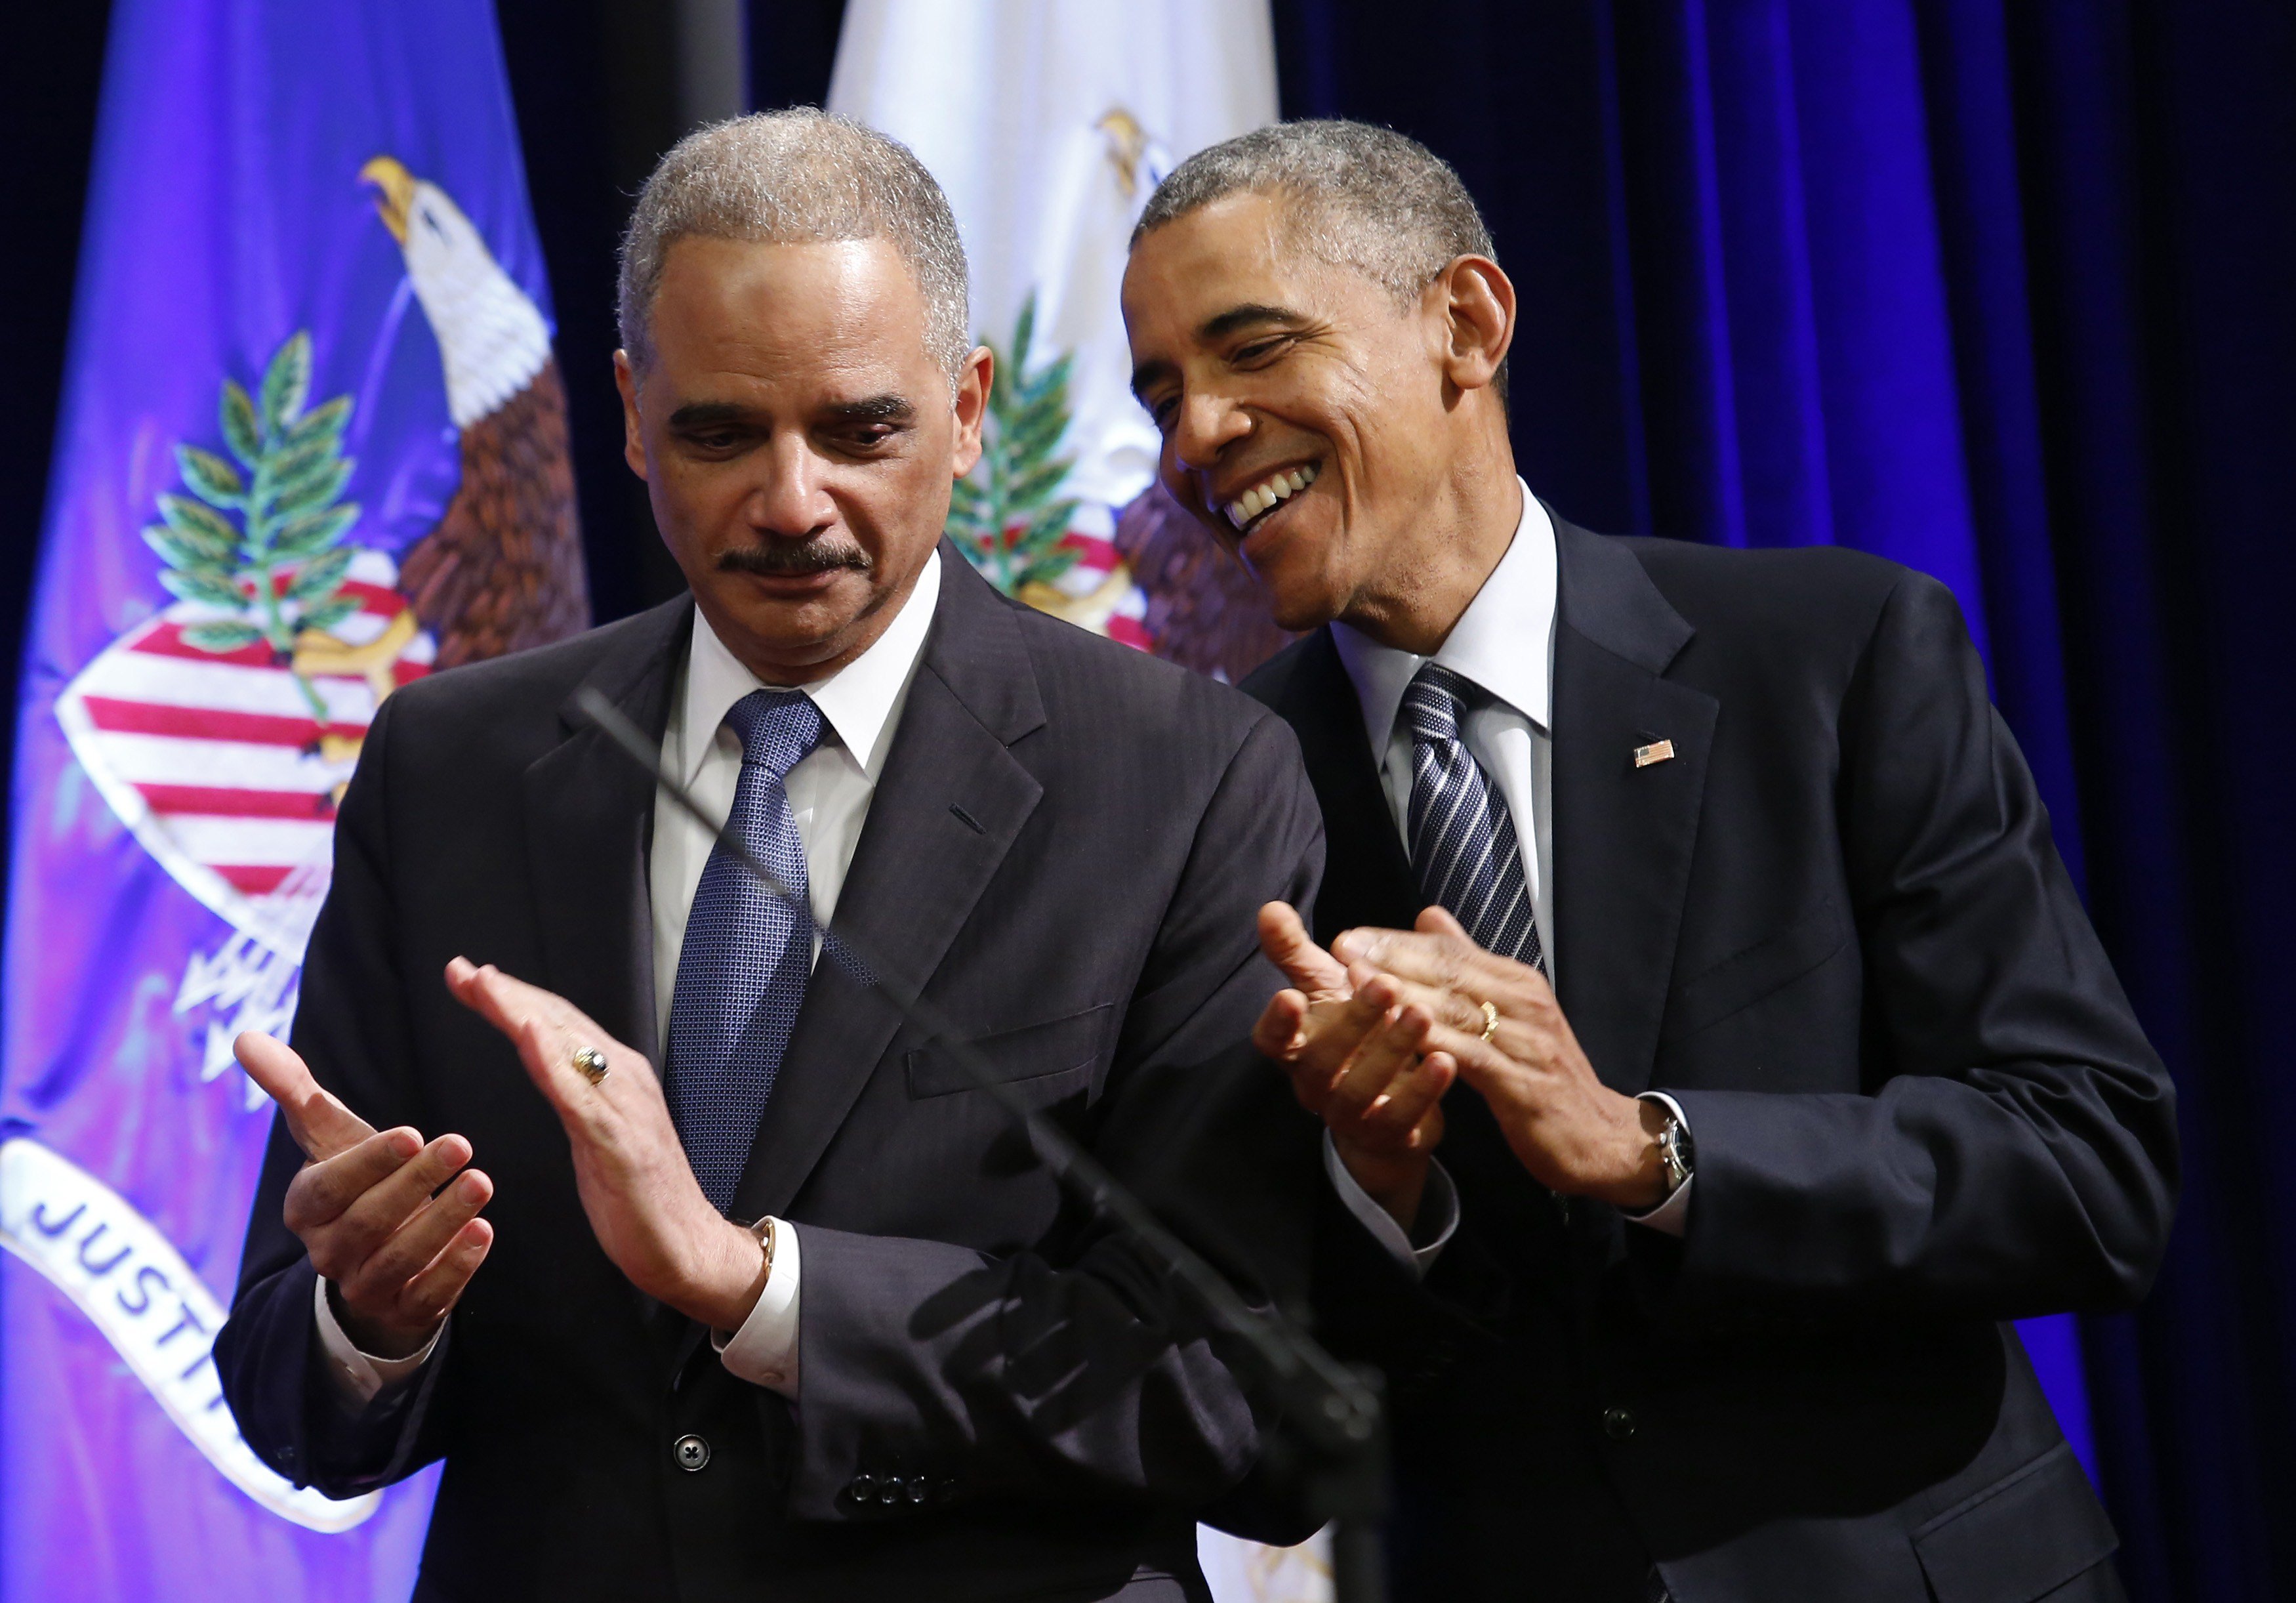 US President Barack Obama (R) talks to outgoing Attorney General Eric Holder at the portrait unveiling ceremony at the Justice Department in Washington, DC on February 27, 2015. The event marks Holder's anticipated departure after more than six years of service. (YURI GRIPAS/AFP/Getty Images)